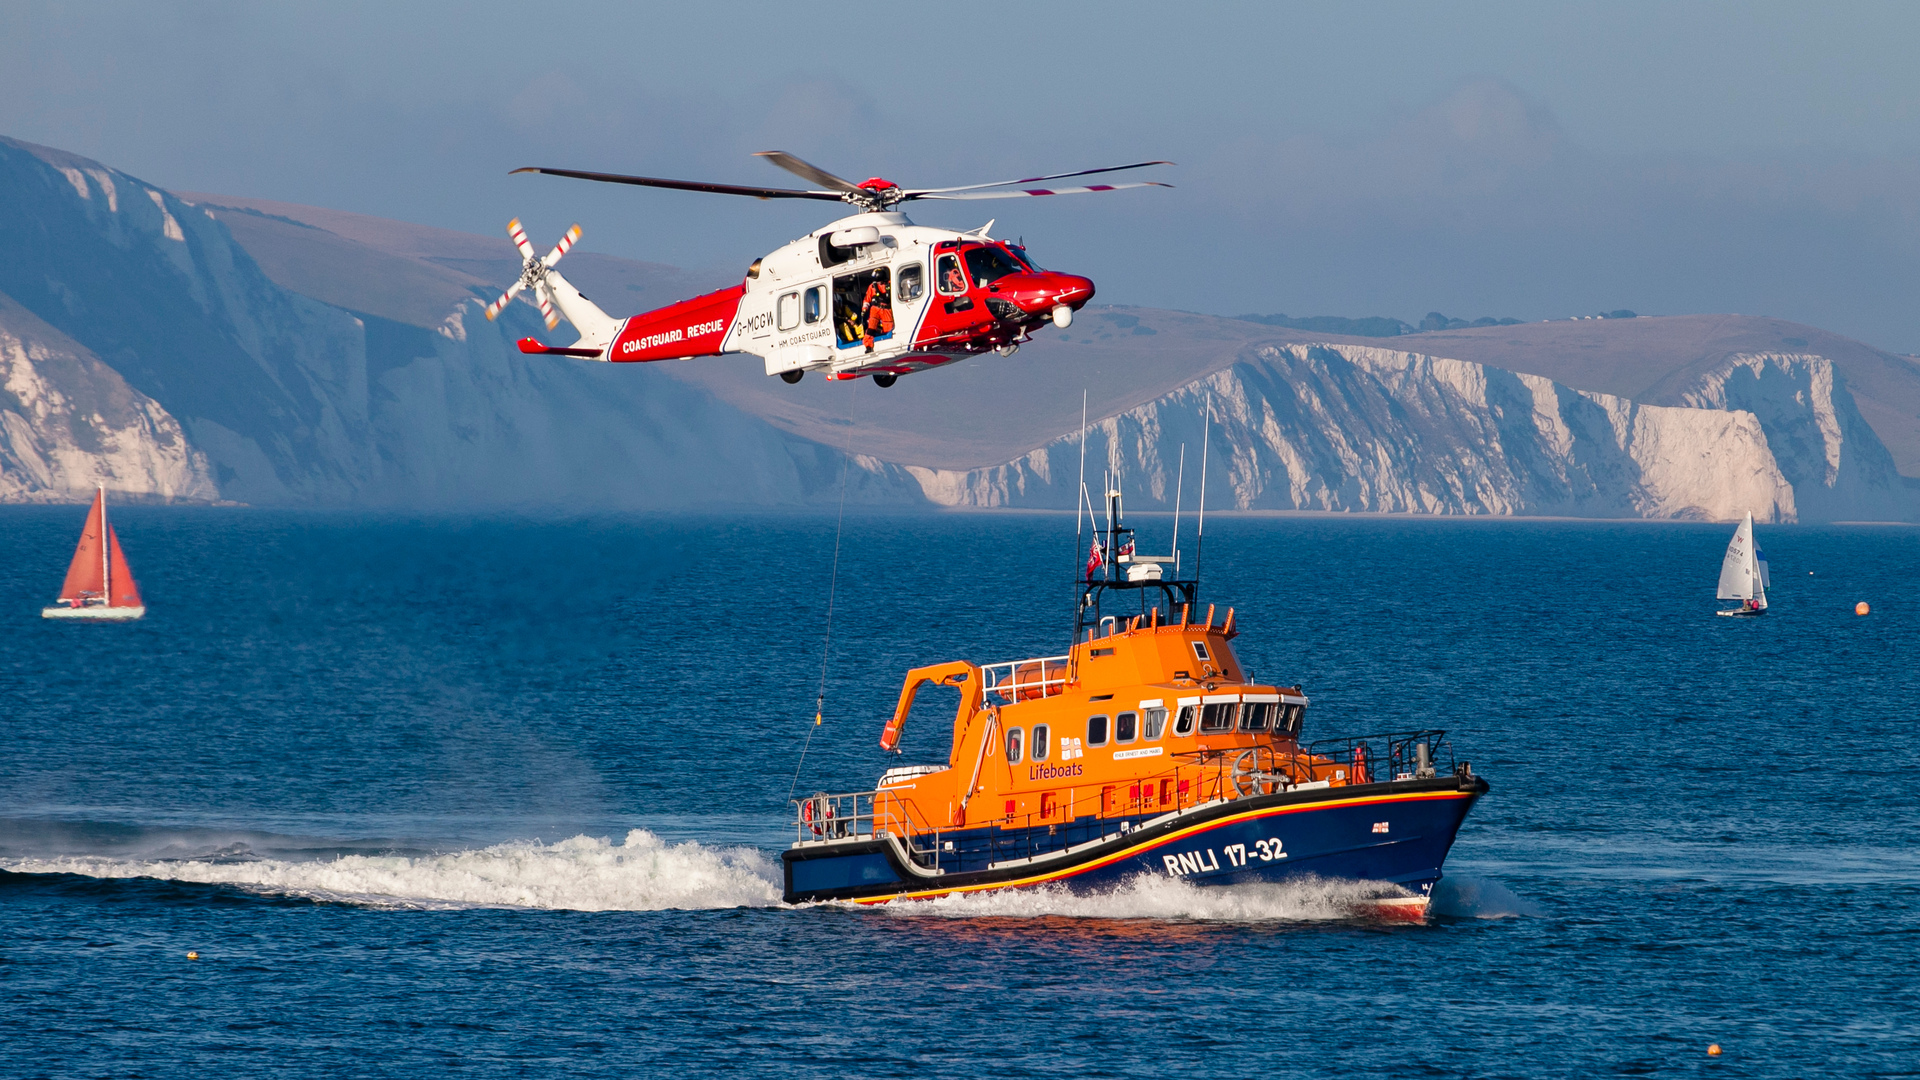 HM Coastguard helicopter hovering above an RNLI all-weather lifeboat